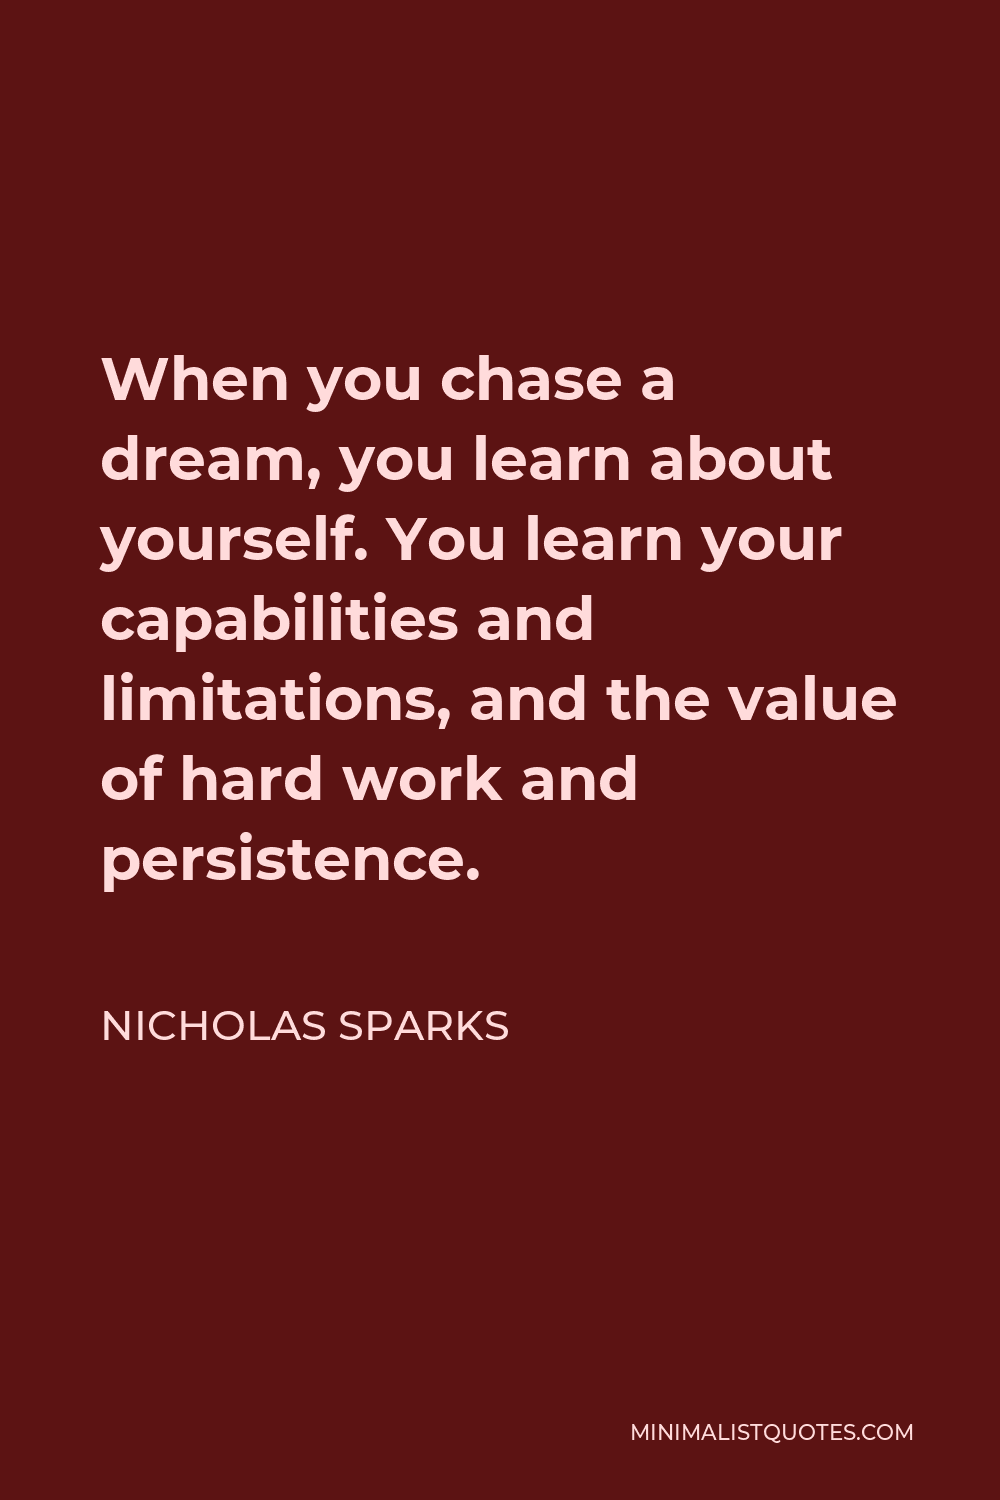 Nicholas Sparks Quote - When you chase a dream, you learn about yourself. You learn your capabilities and limitations, and the value of hard work and persistence.